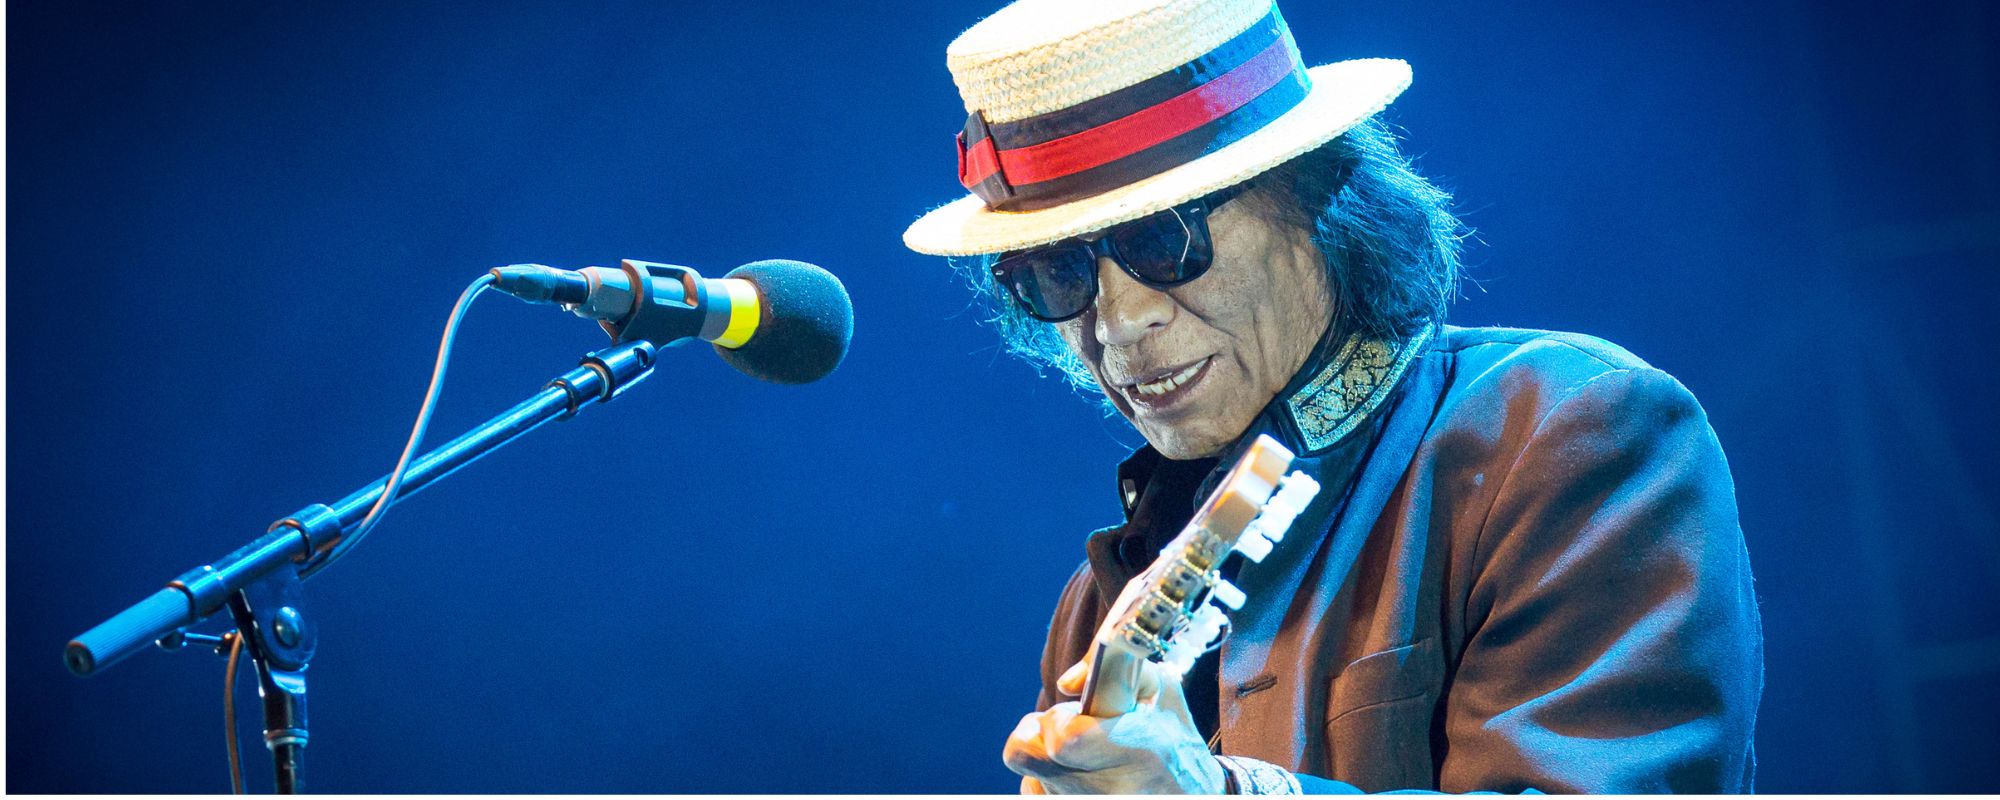 ‘Searching for Sugar Man’ Star Sixto Rodriguez Has Died at 81